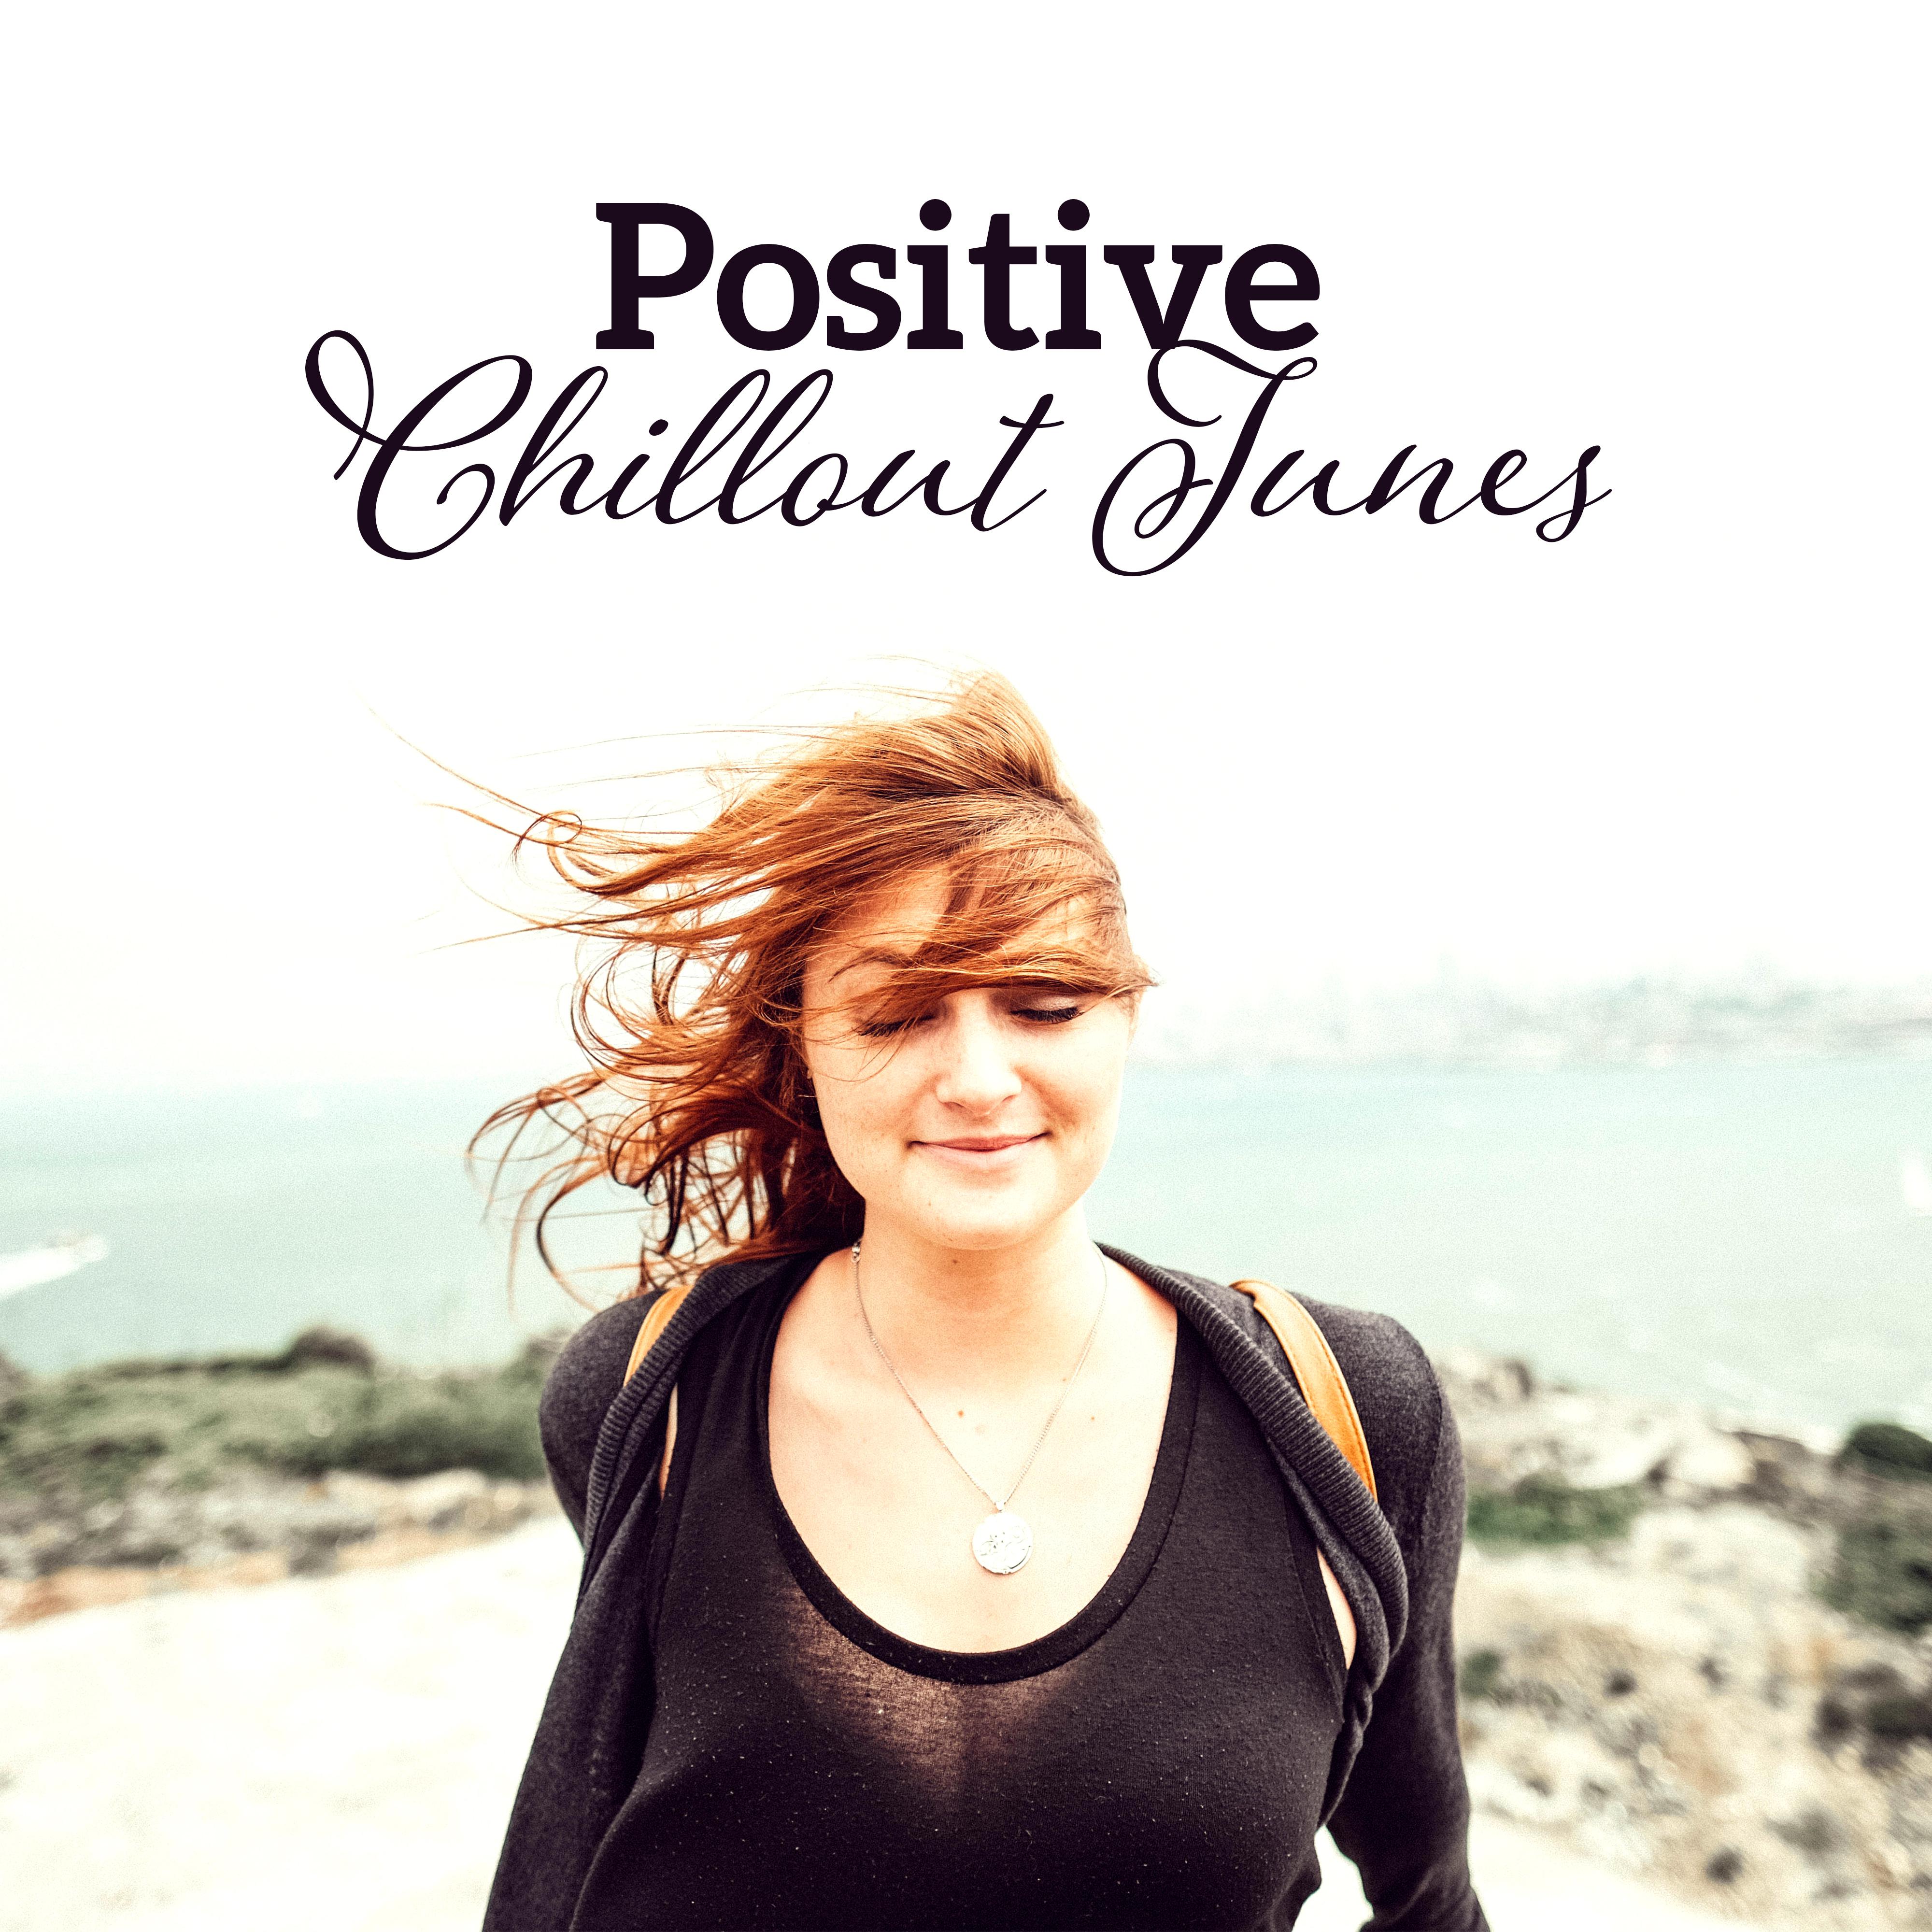 Positive Chillout Tunes – Relax & Chill, Positive Mind, Summer Relax, Electronic Downbeats